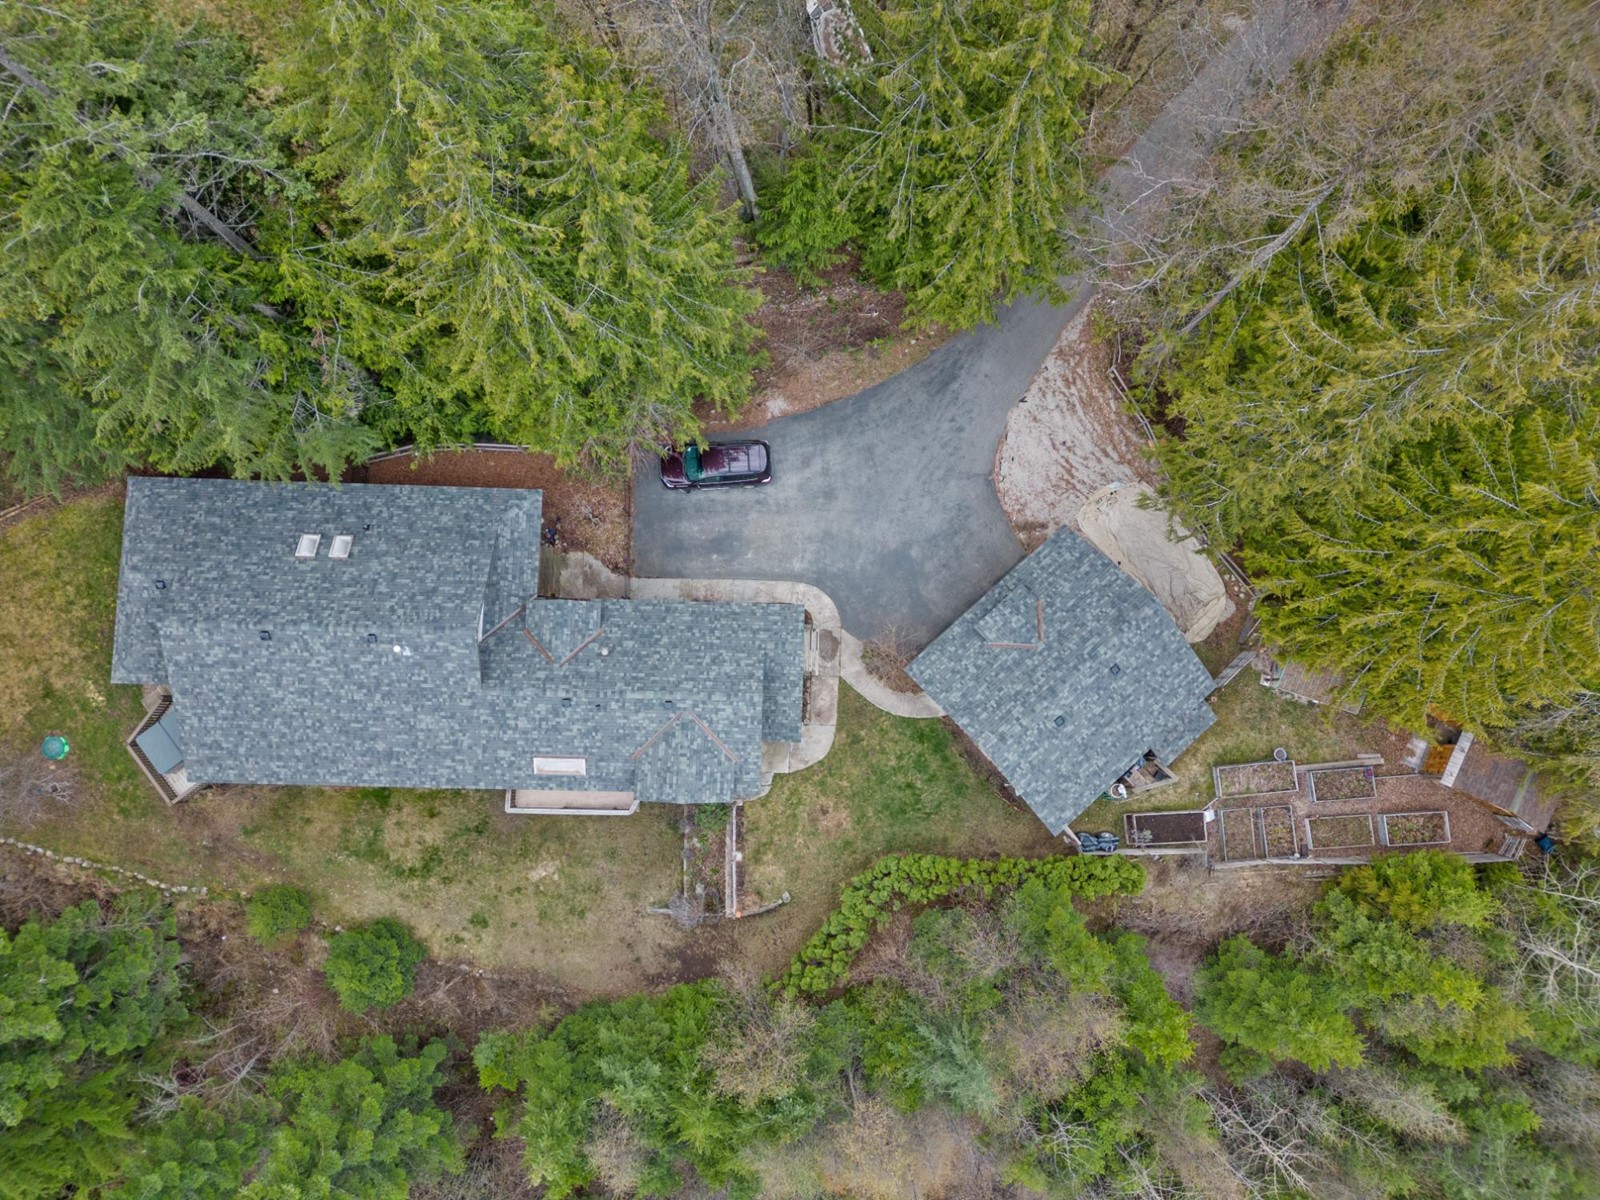 2286 ANNABLE ROAD, Nelson